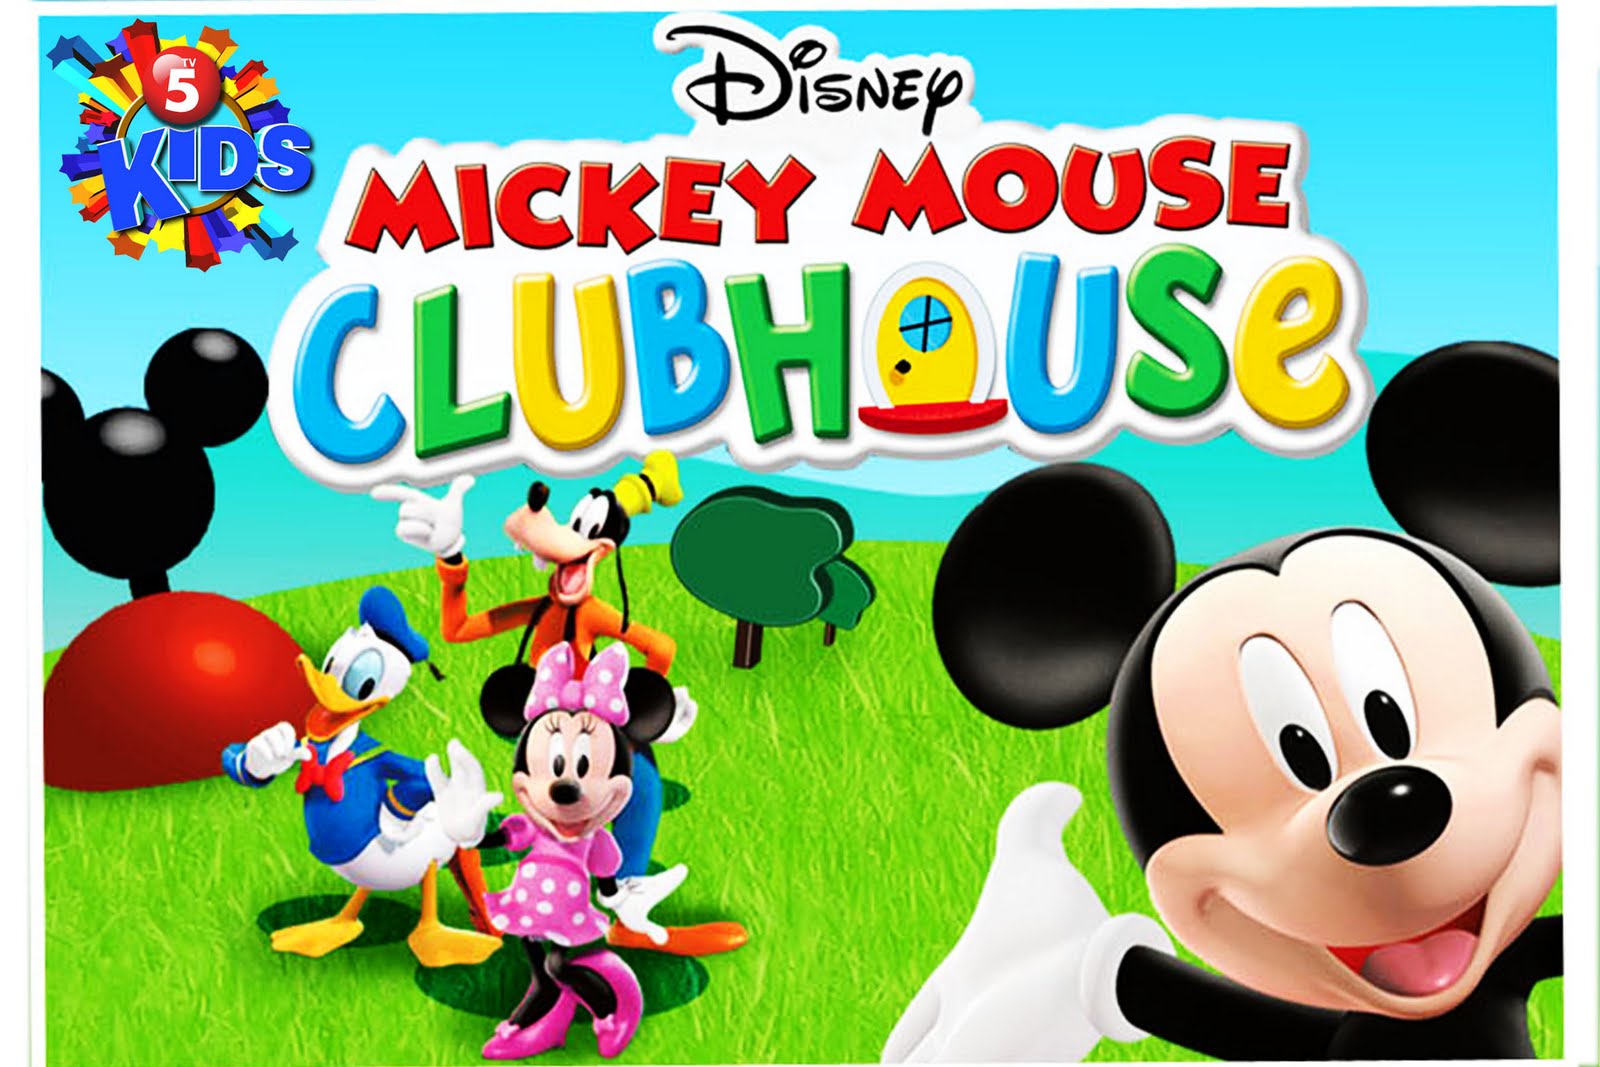 Mickey Mouse Clubhouse | Corduroy (TV series) by Nelvana ...